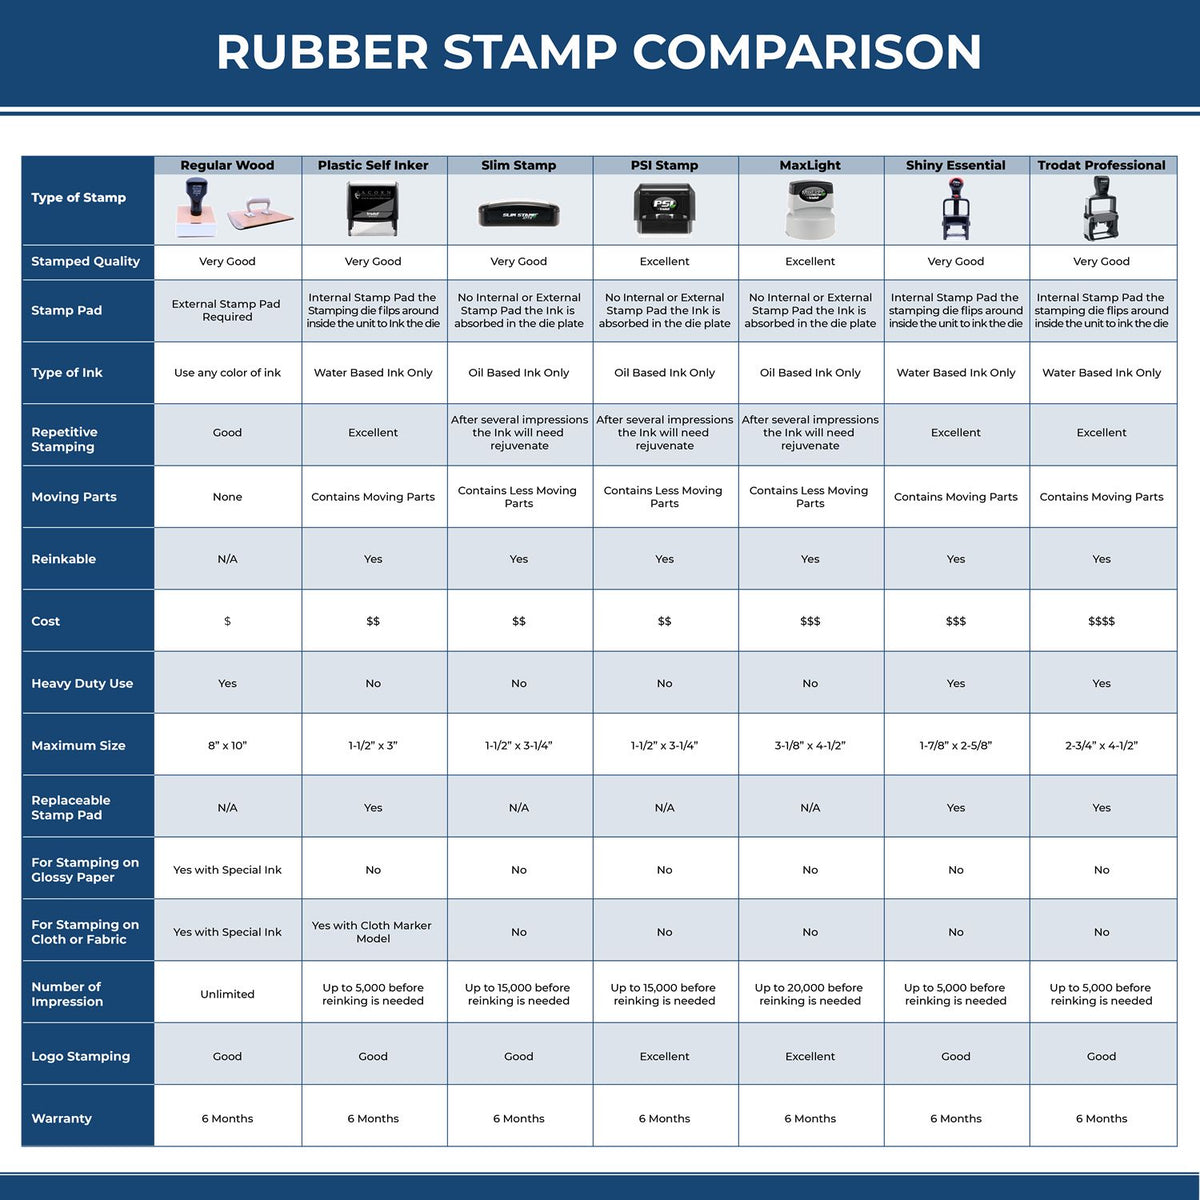 Large Self-Inking Received Without Contents Stamp 4961S Rubber Stamp Comparison